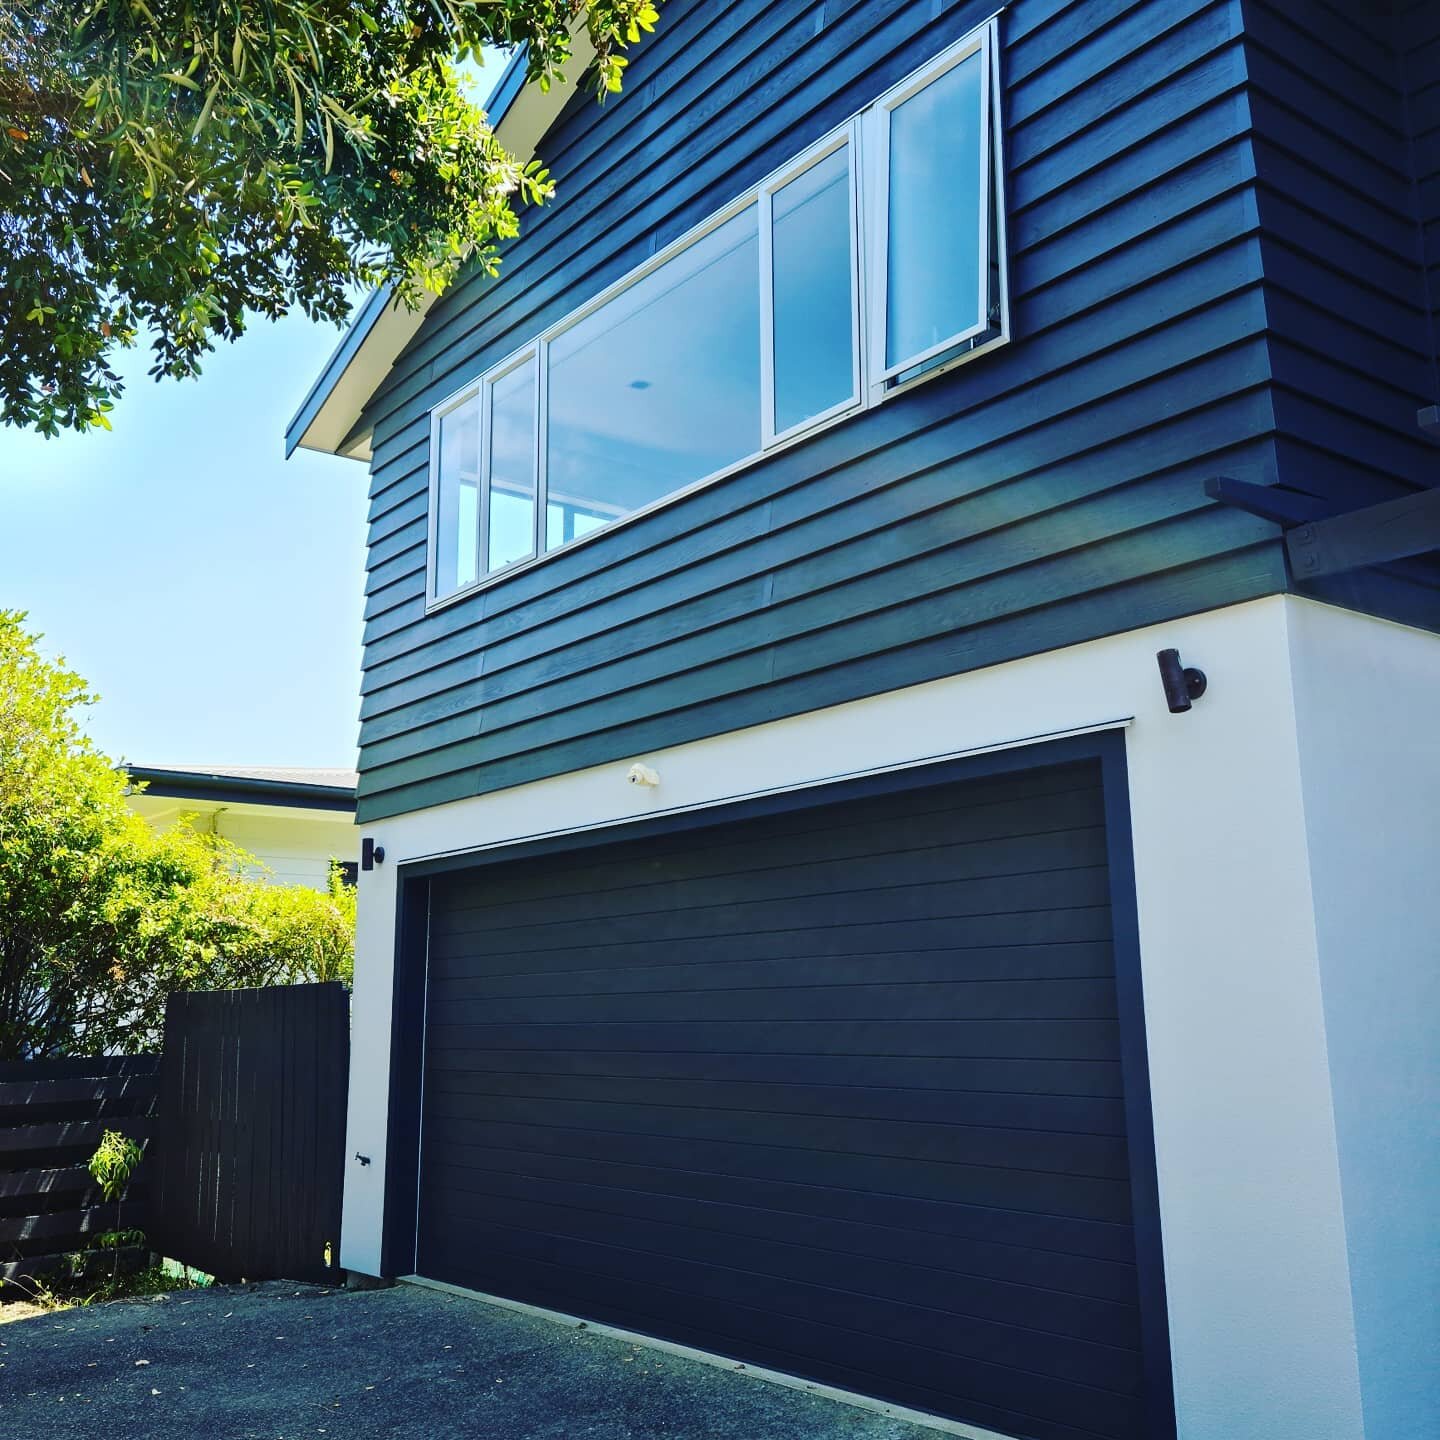 Finished interior/exterior project. Located in manly whangaparaoa came out looking very tidy with a nice modern colour scheme selected by our team. Get in touch for a quote for your next project today!